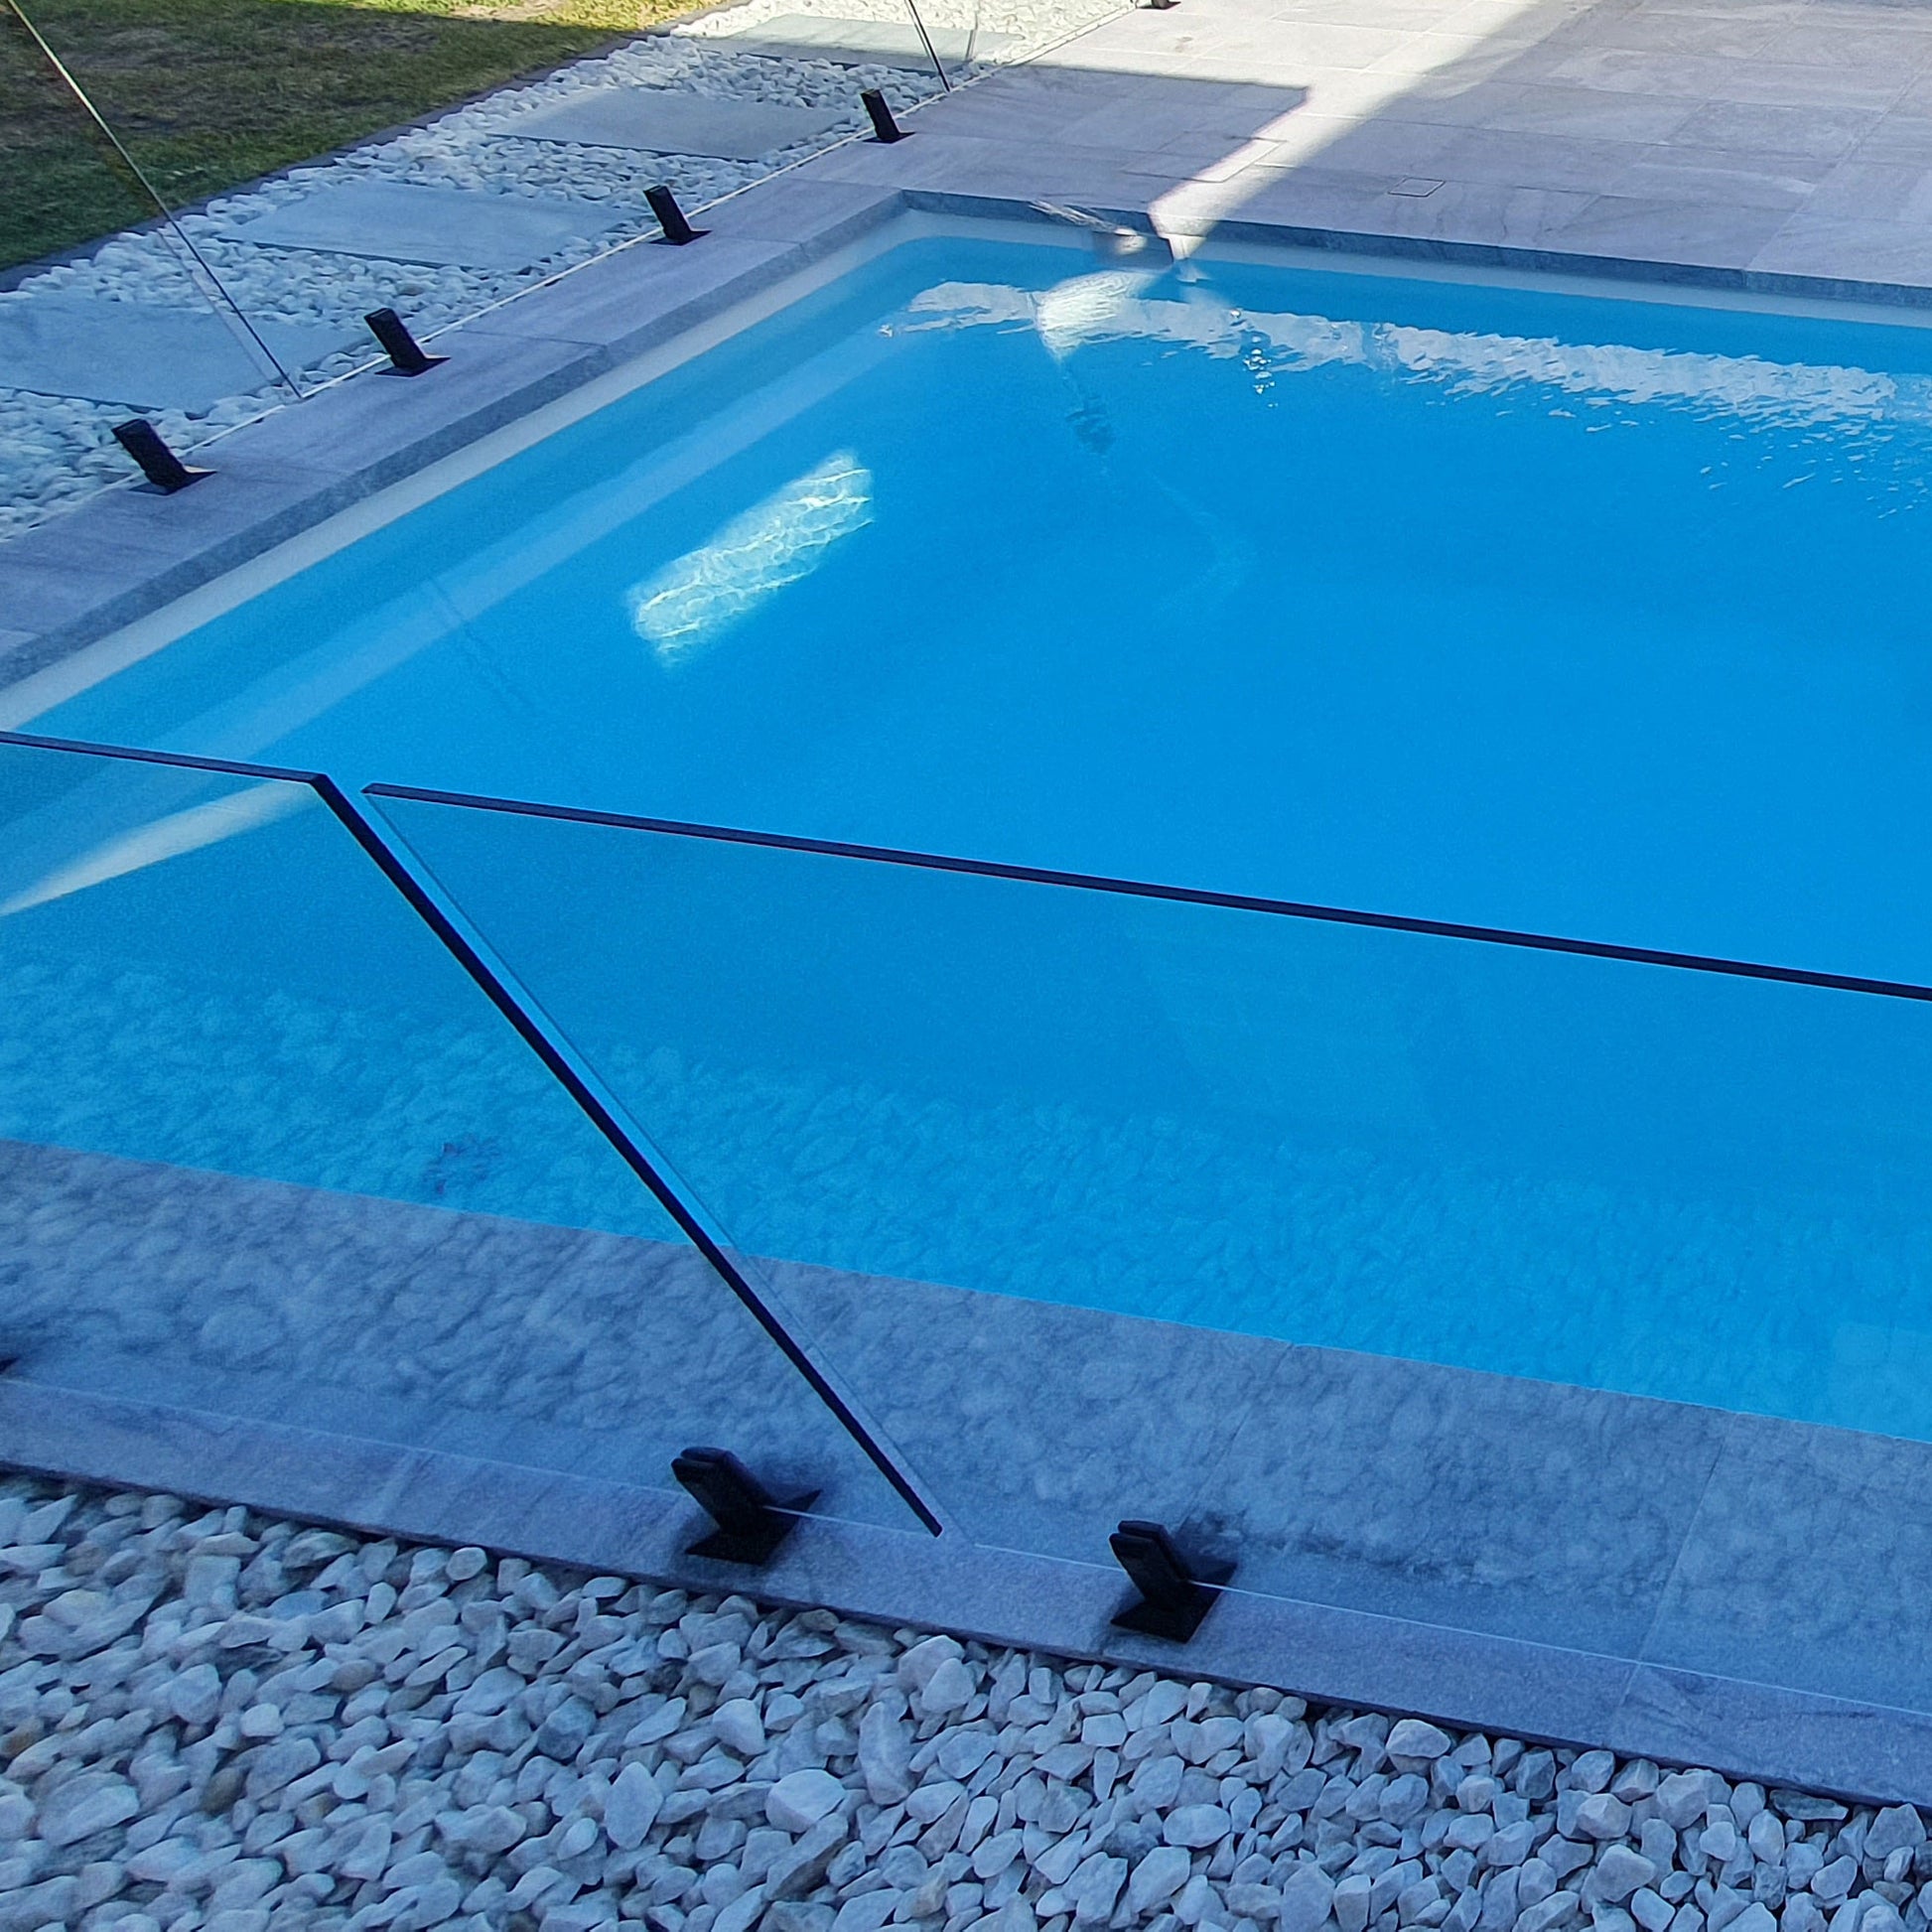 Argento Sandblasted Tumbled Limestone 600x400x30/60mm Drop Nose Coping - 1st Quality - Swimming Pool - Available at iPave Natural Stone